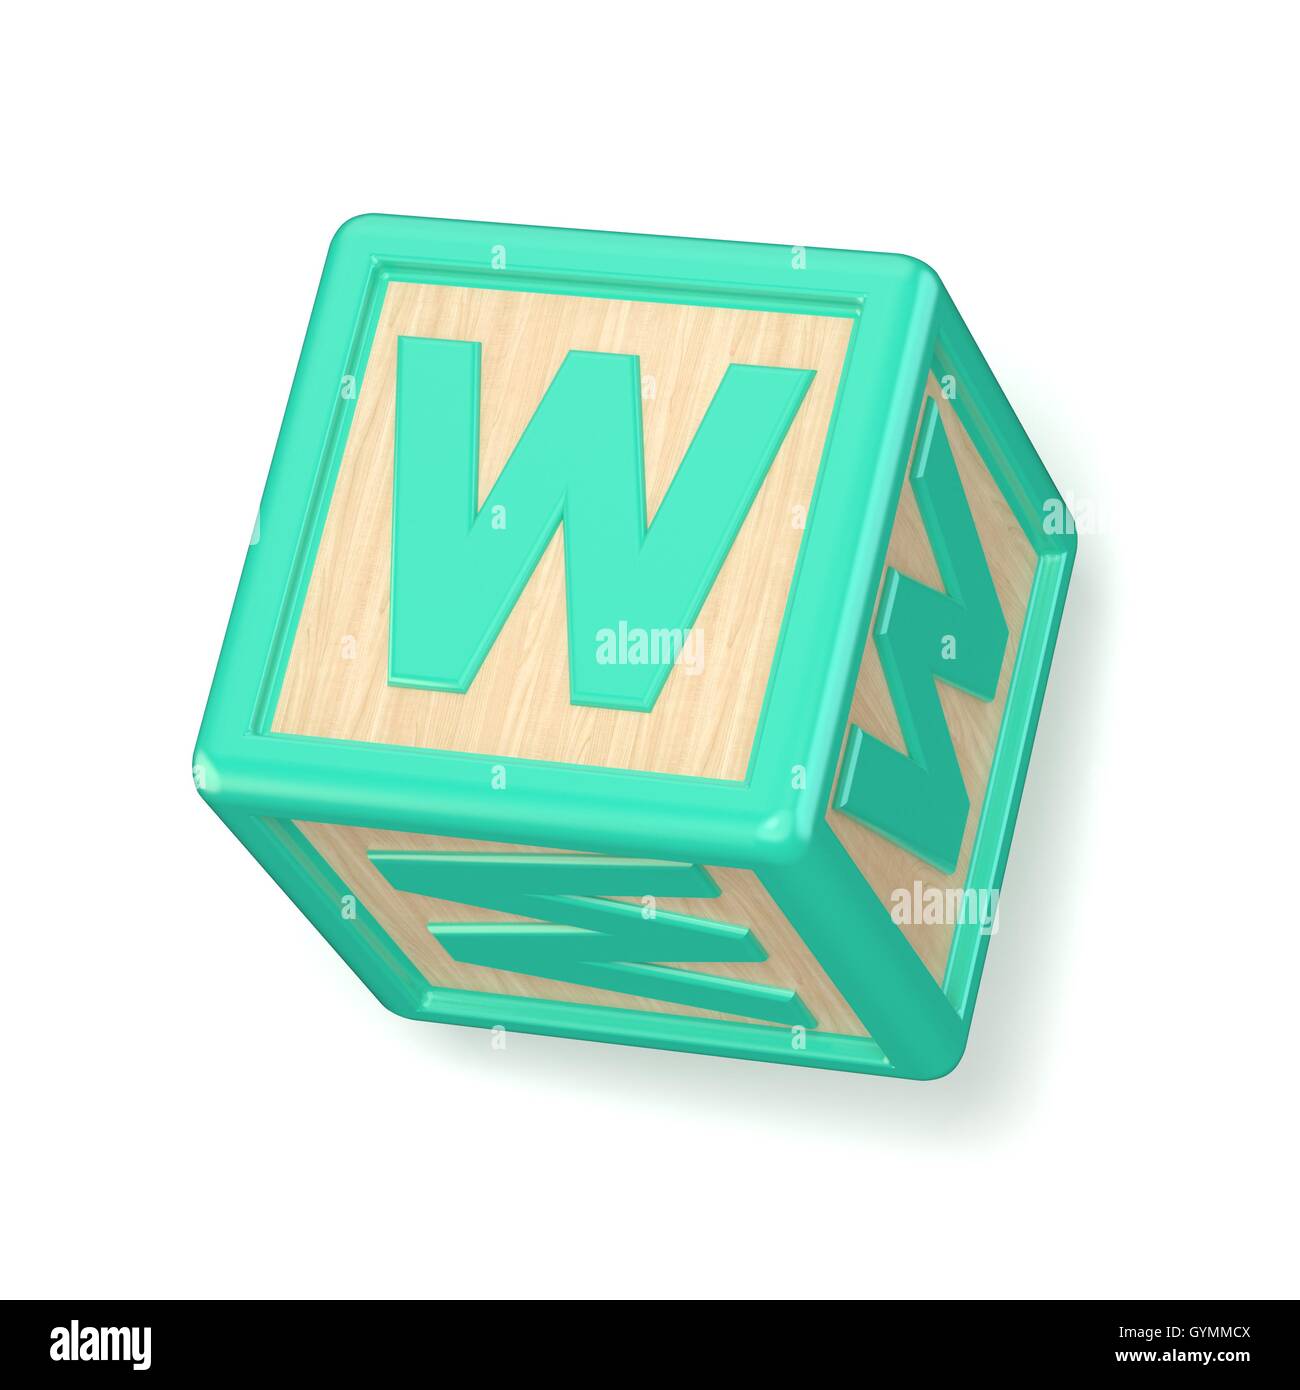 Letter W wooden alphabet blocks font rotated. 3D render illustration isolated on white background Stock Photo